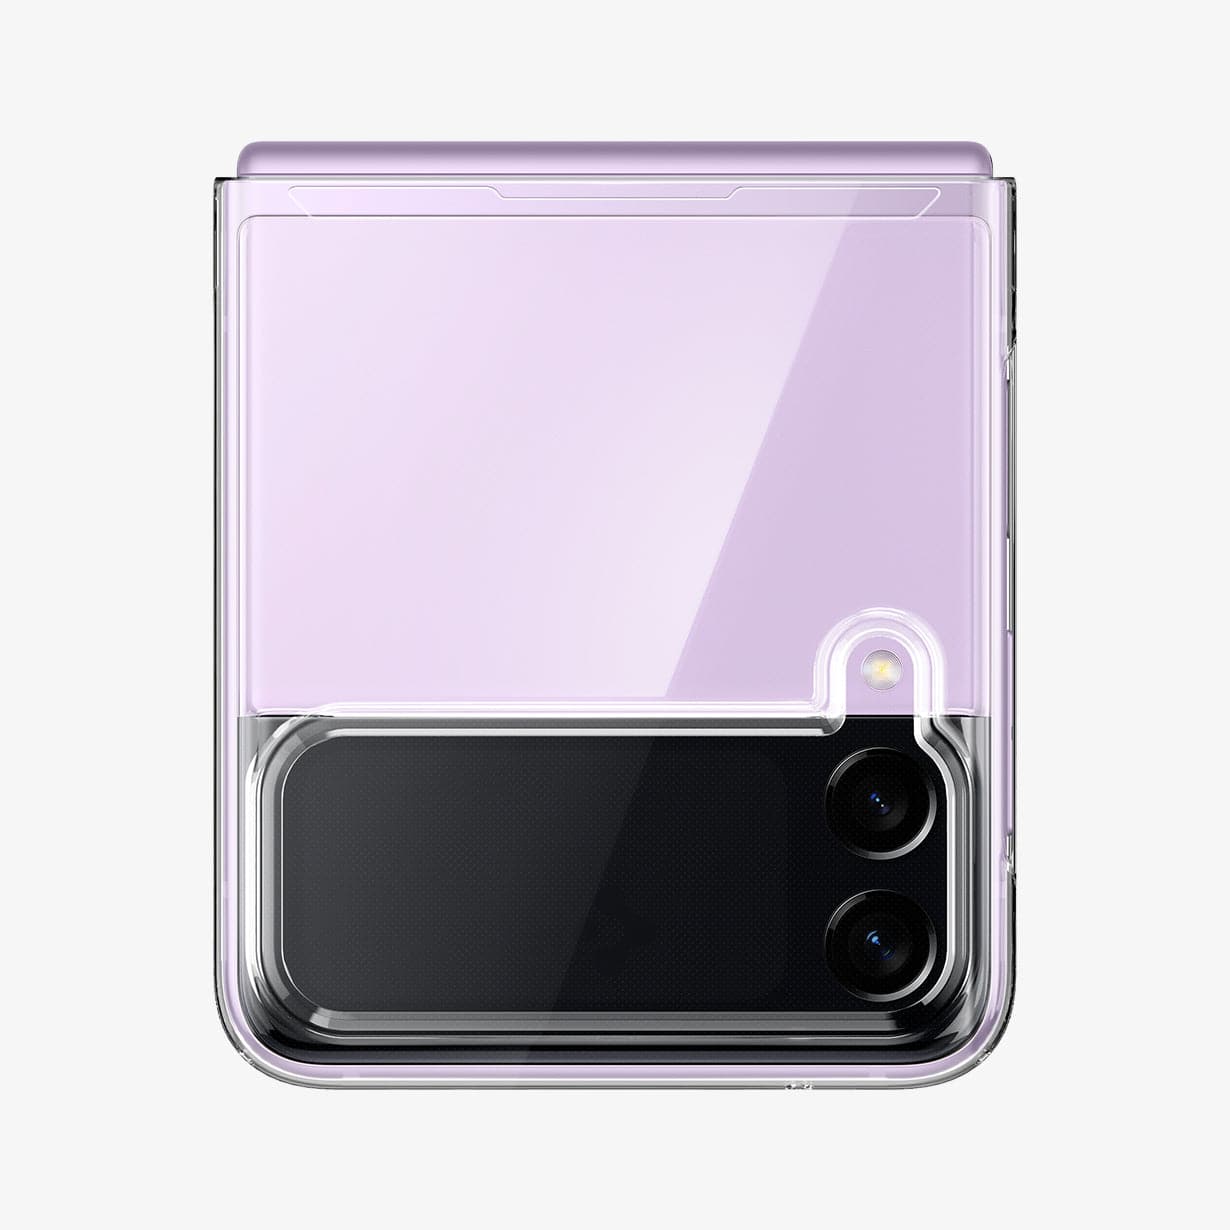 ACS03085 - Galaxy Z Flip 3 Case AirSkin in crystal clear showing the top portion of the back with device fully closed